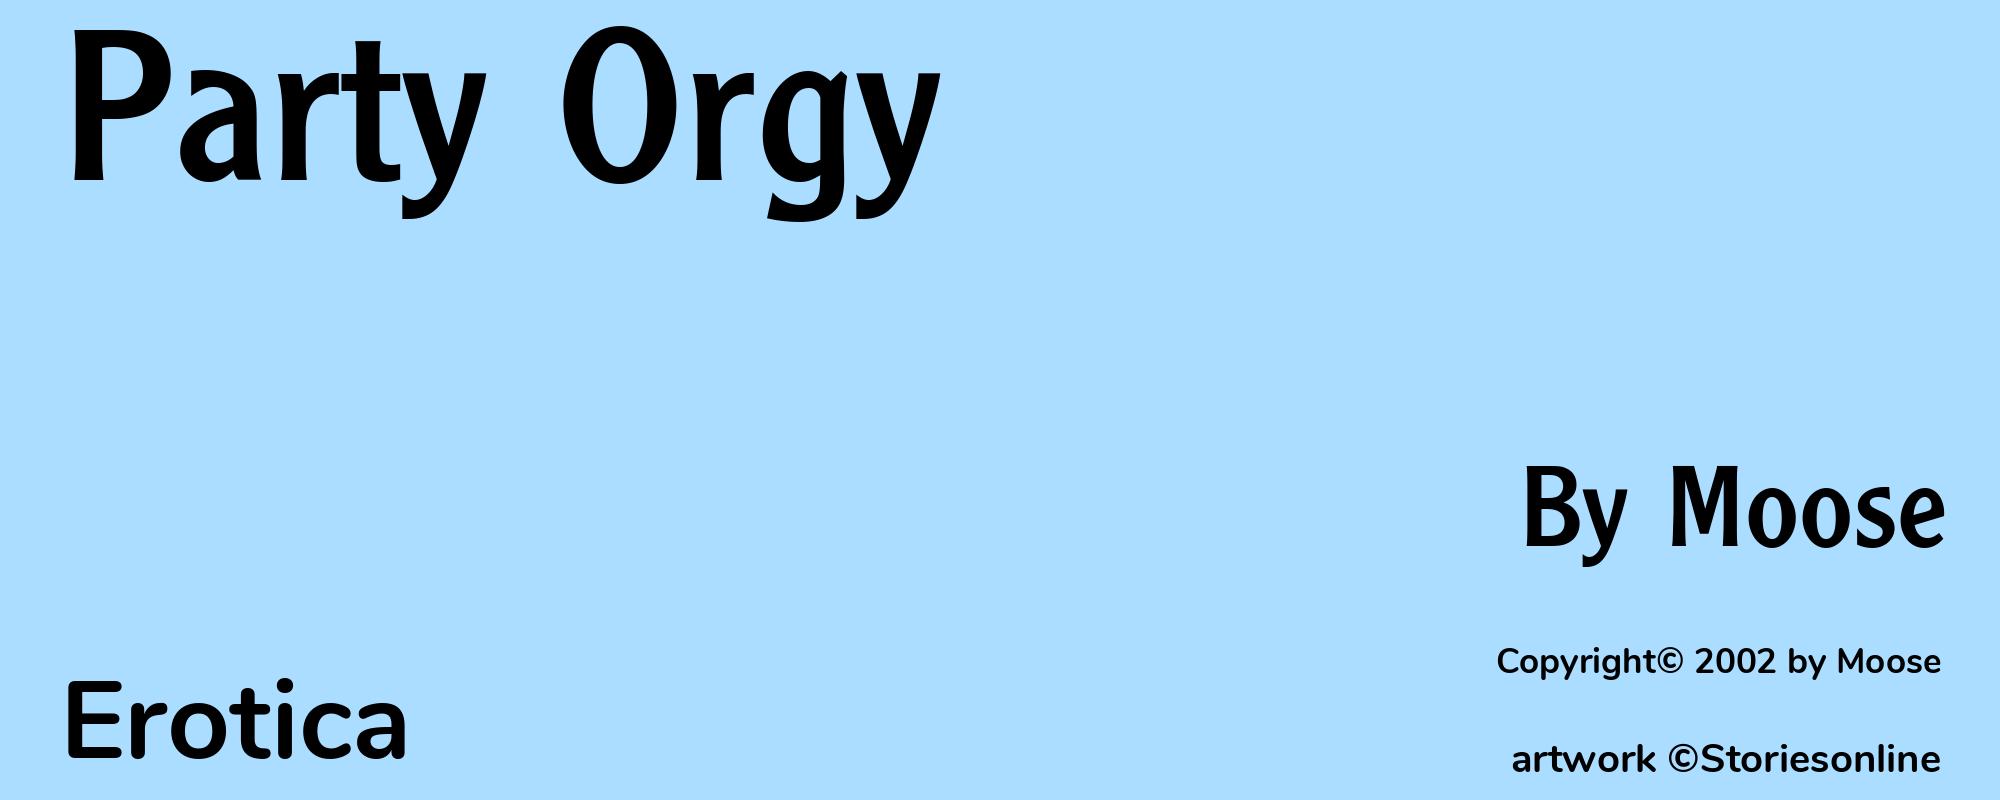 Party Orgy - Cover